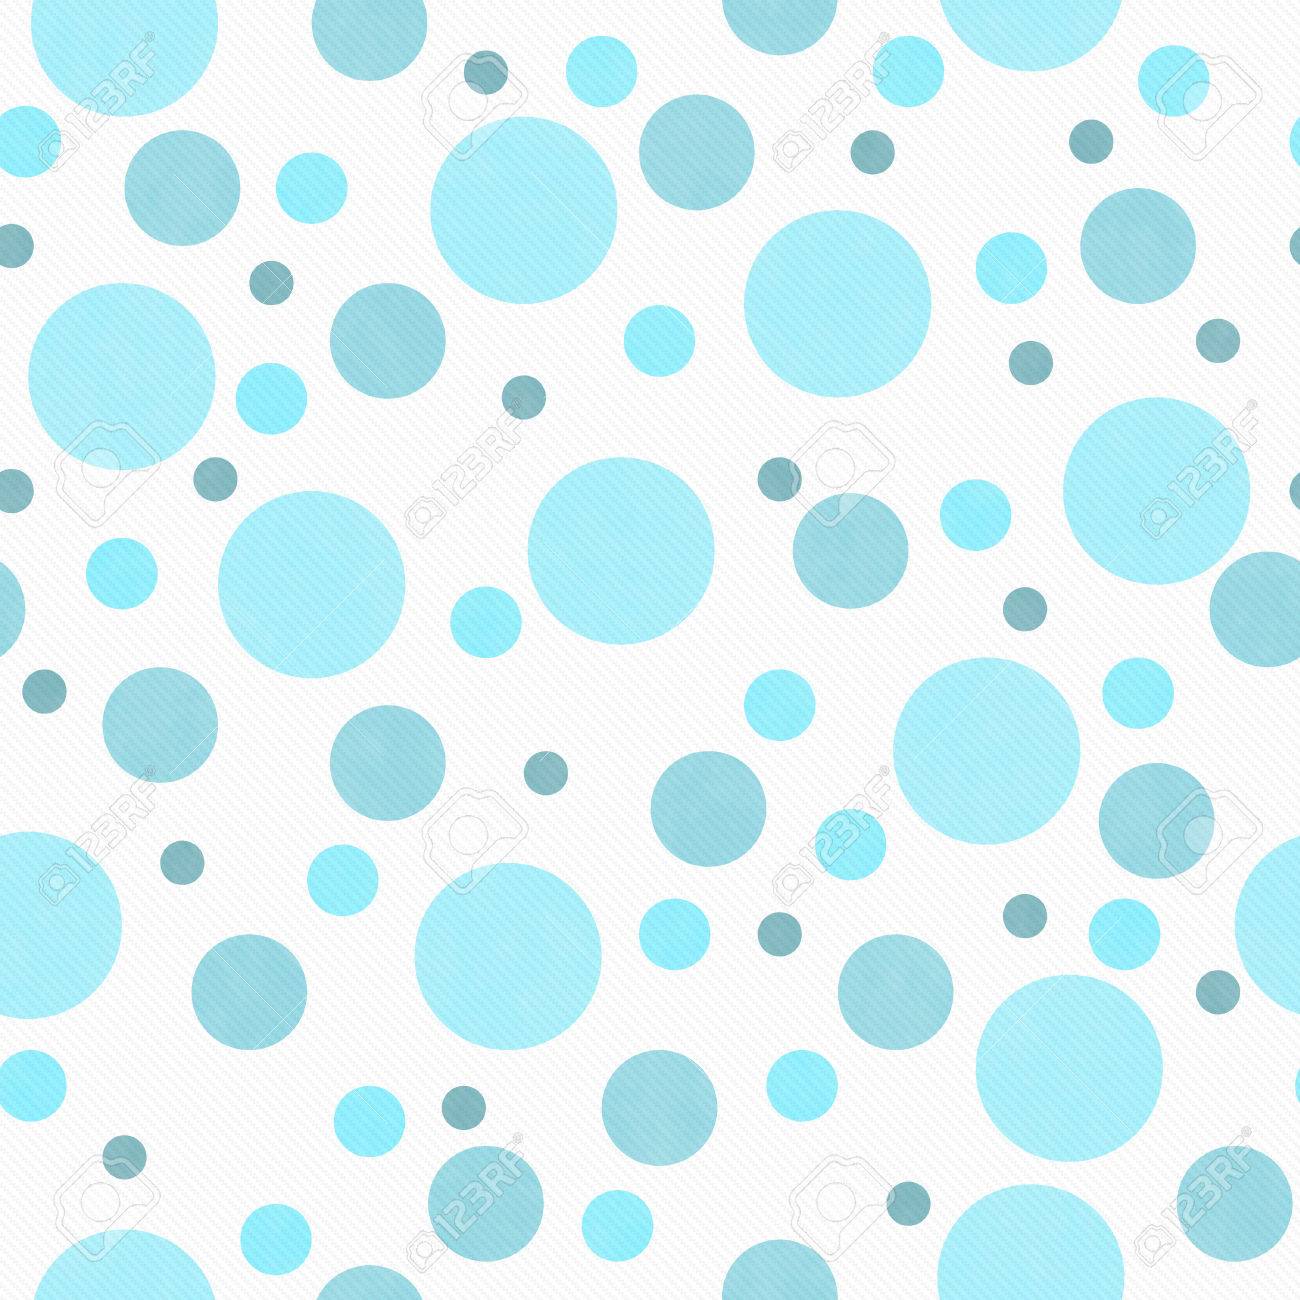 Teal And White Polka Dot Tile Pattern Repeat Background